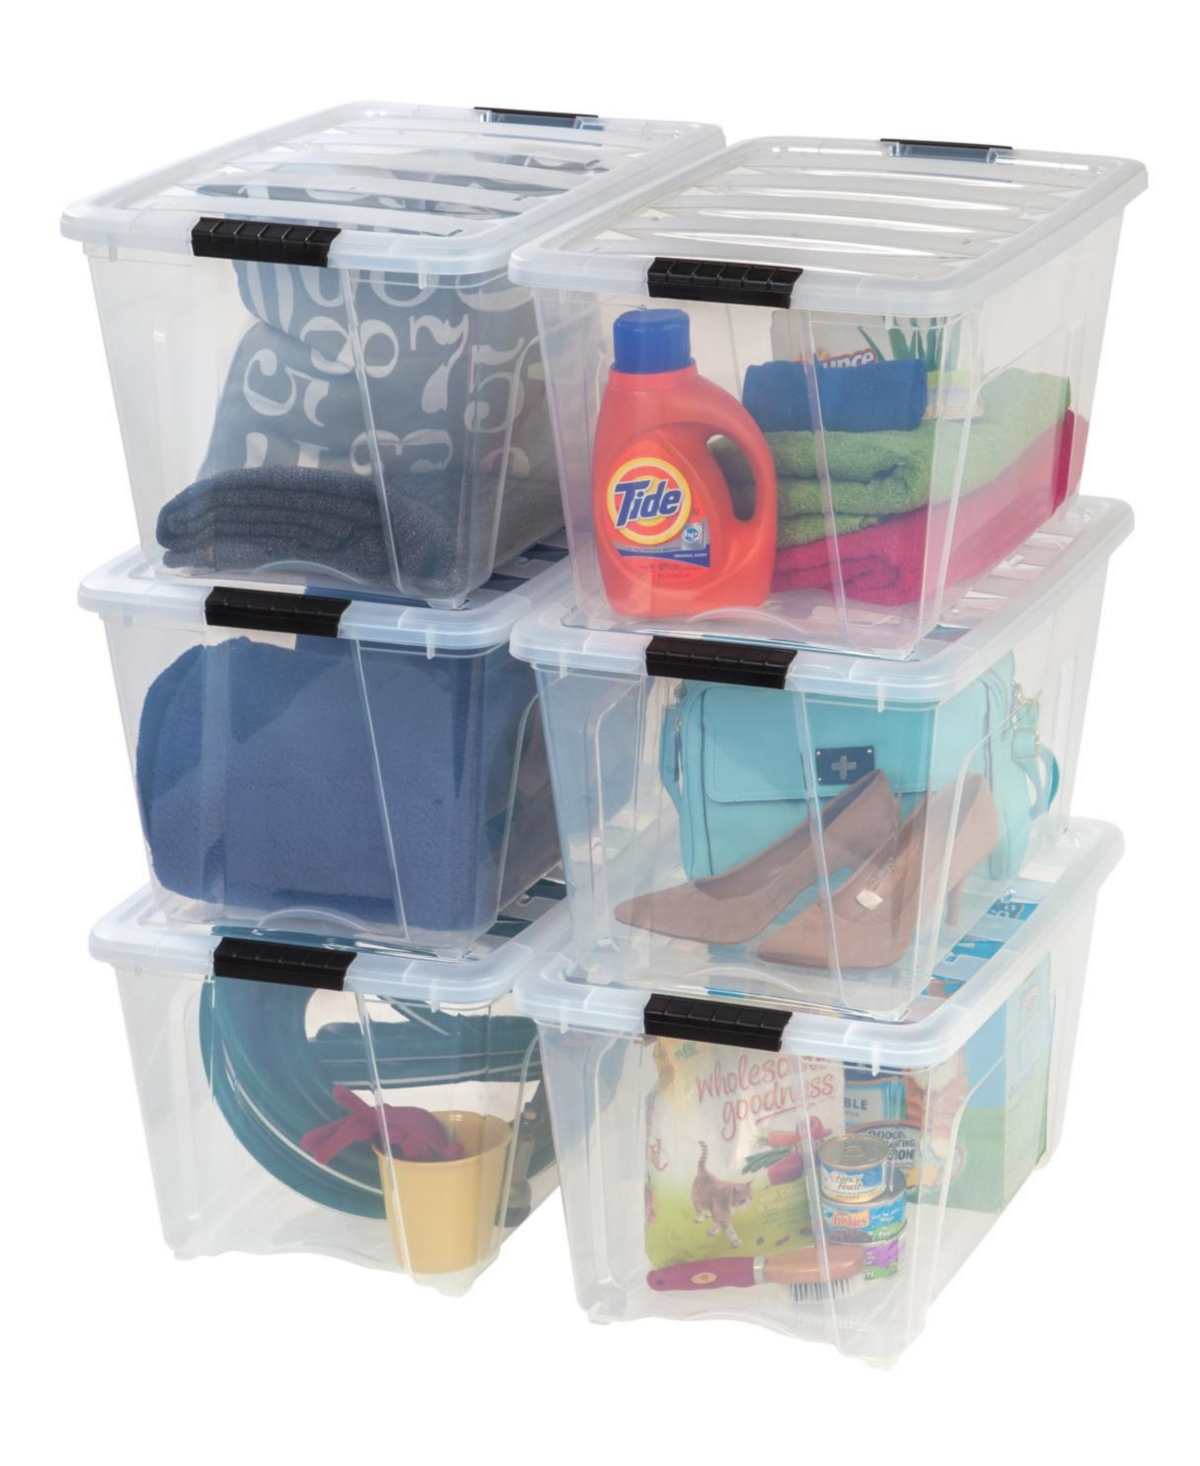 6 Pack 53qt Clear View Plastic Storage Bin with Lid and Secure Latching Buckles